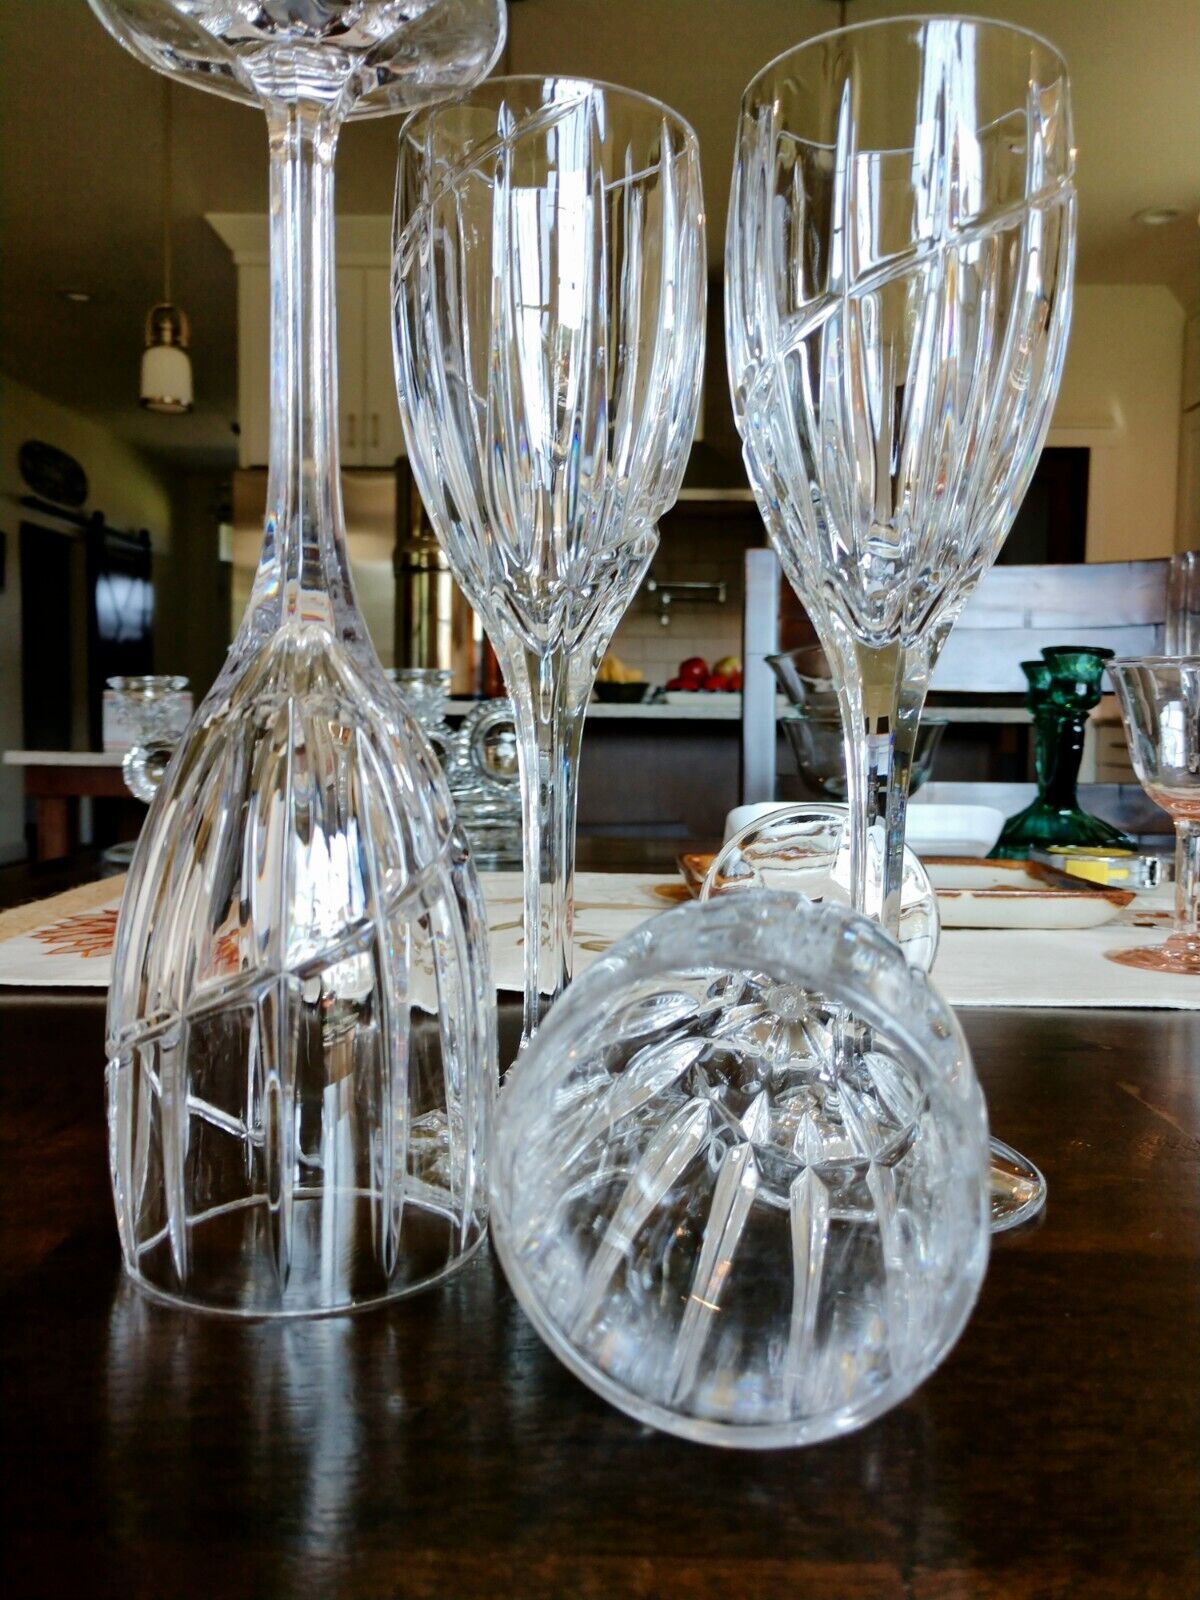 Mikasa Uptown Chrystal Wine Glasses With Swirl And Vertical Design Set Of 4.